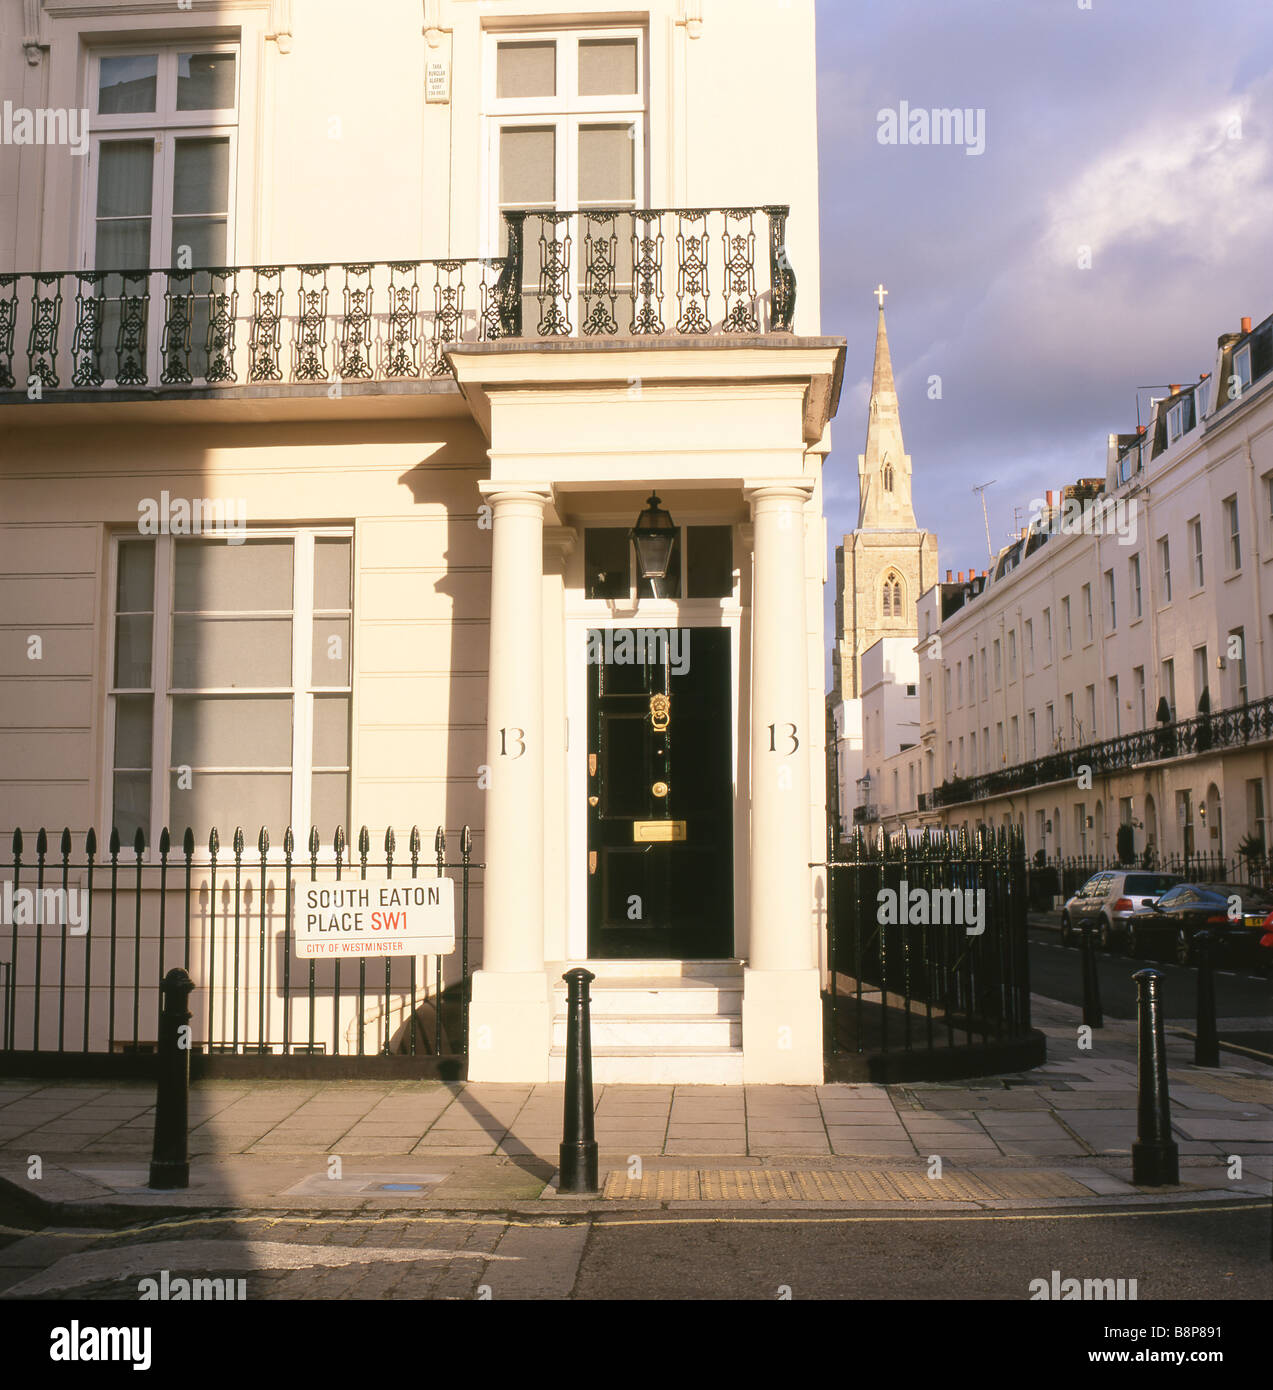 South Eaton Place street sign, black front door and expensive homes in autumn sunshine Eaton Square, Belgravia London SW1 England UK    KATHY DEWITT Stock Photo